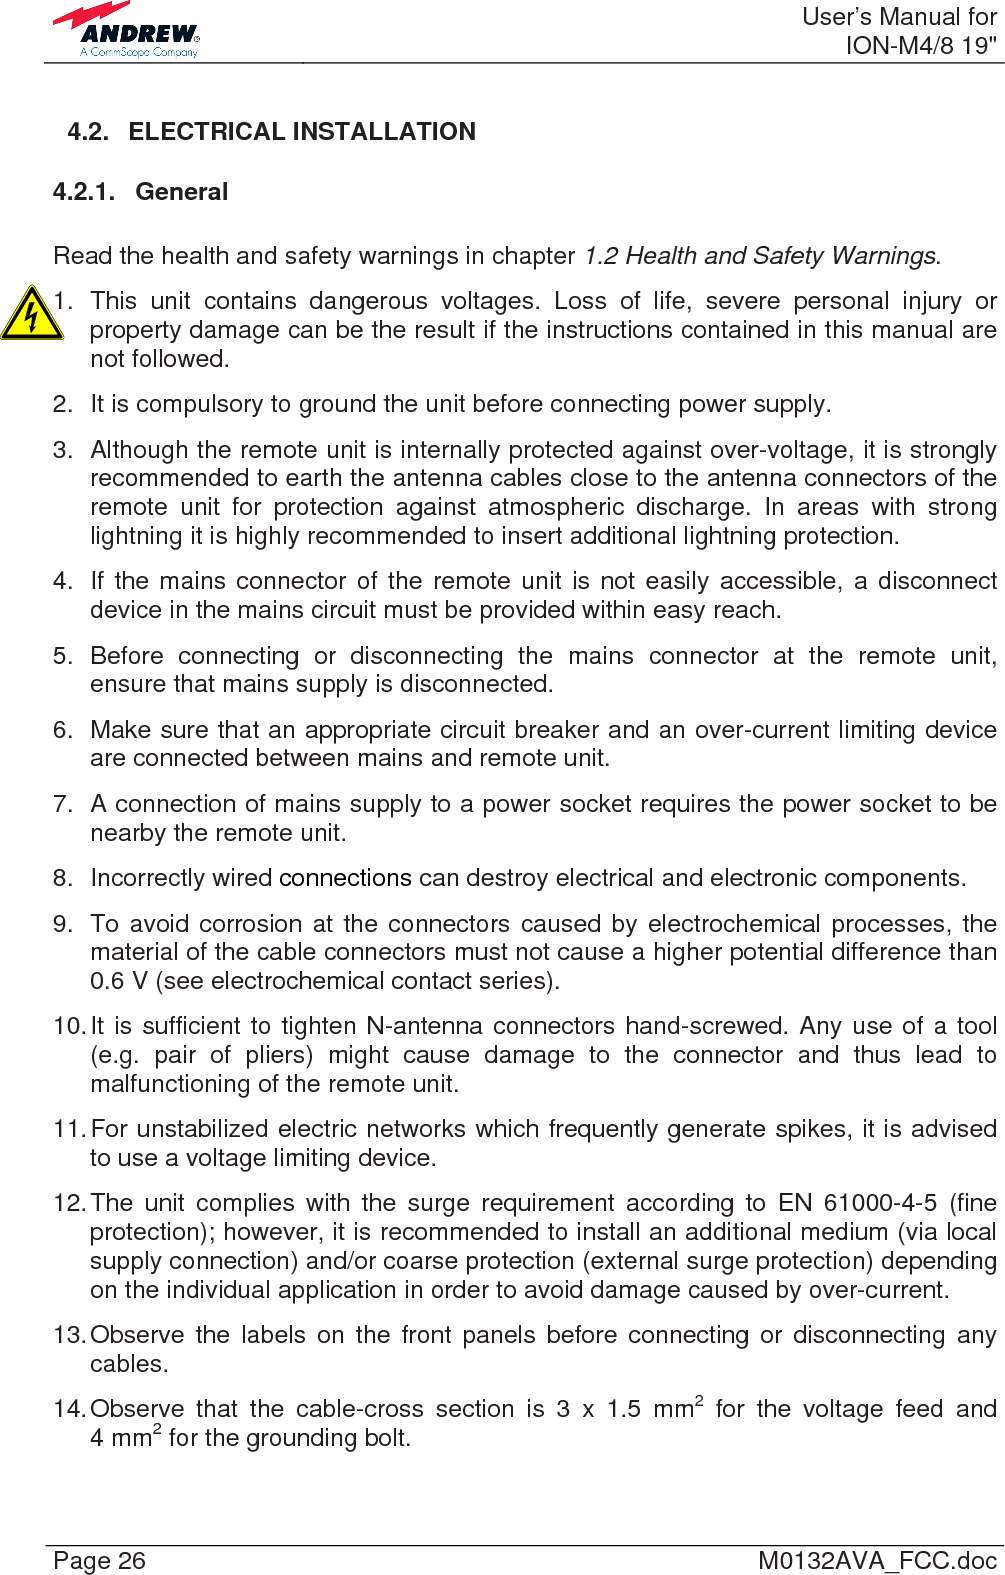  User’s Manual forION-M4/8 19&quot; Page 26  M0132AVA_FCC.doc 4.2. ELECTRICAL INSTALLATION 4.2.1. General  Read the health and safety warnings in chapter 1.2 Health and Safety Warnings. 1. This unit contains dangerous voltages. Loss of life, severe personal injury or property damage can be the result if the instructions contained in this manual are not followed. 2.  It is compulsory to ground the unit before connecting power supply.  3.  Although the remote unit is internally protected against over-voltage, it is strongly recommended to earth the antenna cables close to the antenna connectors of the remote unit for protection against atmospheric discharge. In areas with strong lightning it is highly recommended to insert additional lightning protection. 4.  If the mains connector of the remote unit is not easily accessible, a disconnect device in the mains circuit must be provided within easy reach. 5. Before connecting or disconnecting the mains connector at the remote unit, ensure that mains supply is disconnected. 6.  Make sure that an appropriate circuit breaker and an over-current limiting device are connected between mains and remote unit. 7.  A connection of mains supply to a power socket requires the power socket to be nearby the remote unit. 8. Incorrectly wired connections can destroy electrical and electronic components. 9.  To avoid corrosion at the connectors caused by electrochemical processes, the material of the cable connectors must not cause a higher potential difference than 0.6 V (see electrochemical contact series). 10. It is sufficient to tighten N-antenna connectors hand-screwed. Any use of a tool (e.g. pair of pliers) might cause damage to the connector and thus lead to malfunctioning of the remote unit. 11. For unstabilized electric networks which frequently generate spikes, it is advised to use a voltage limiting device.  12. The unit complies with the surge requirement according to EN 61000-4-5 (fine protection); however, it is recommended to install an additional medium (via local supply connection) and/or coarse protection (external surge protection) depending on the individual application in order to avoid damage caused by over-current. 13. Observe the labels on the front panels before connecting or disconnecting any cables. 14. Observe that the cable-cross section is 3 x 1.5 mm2 for the voltage feed and 4 mm2 for the grounding bolt.  